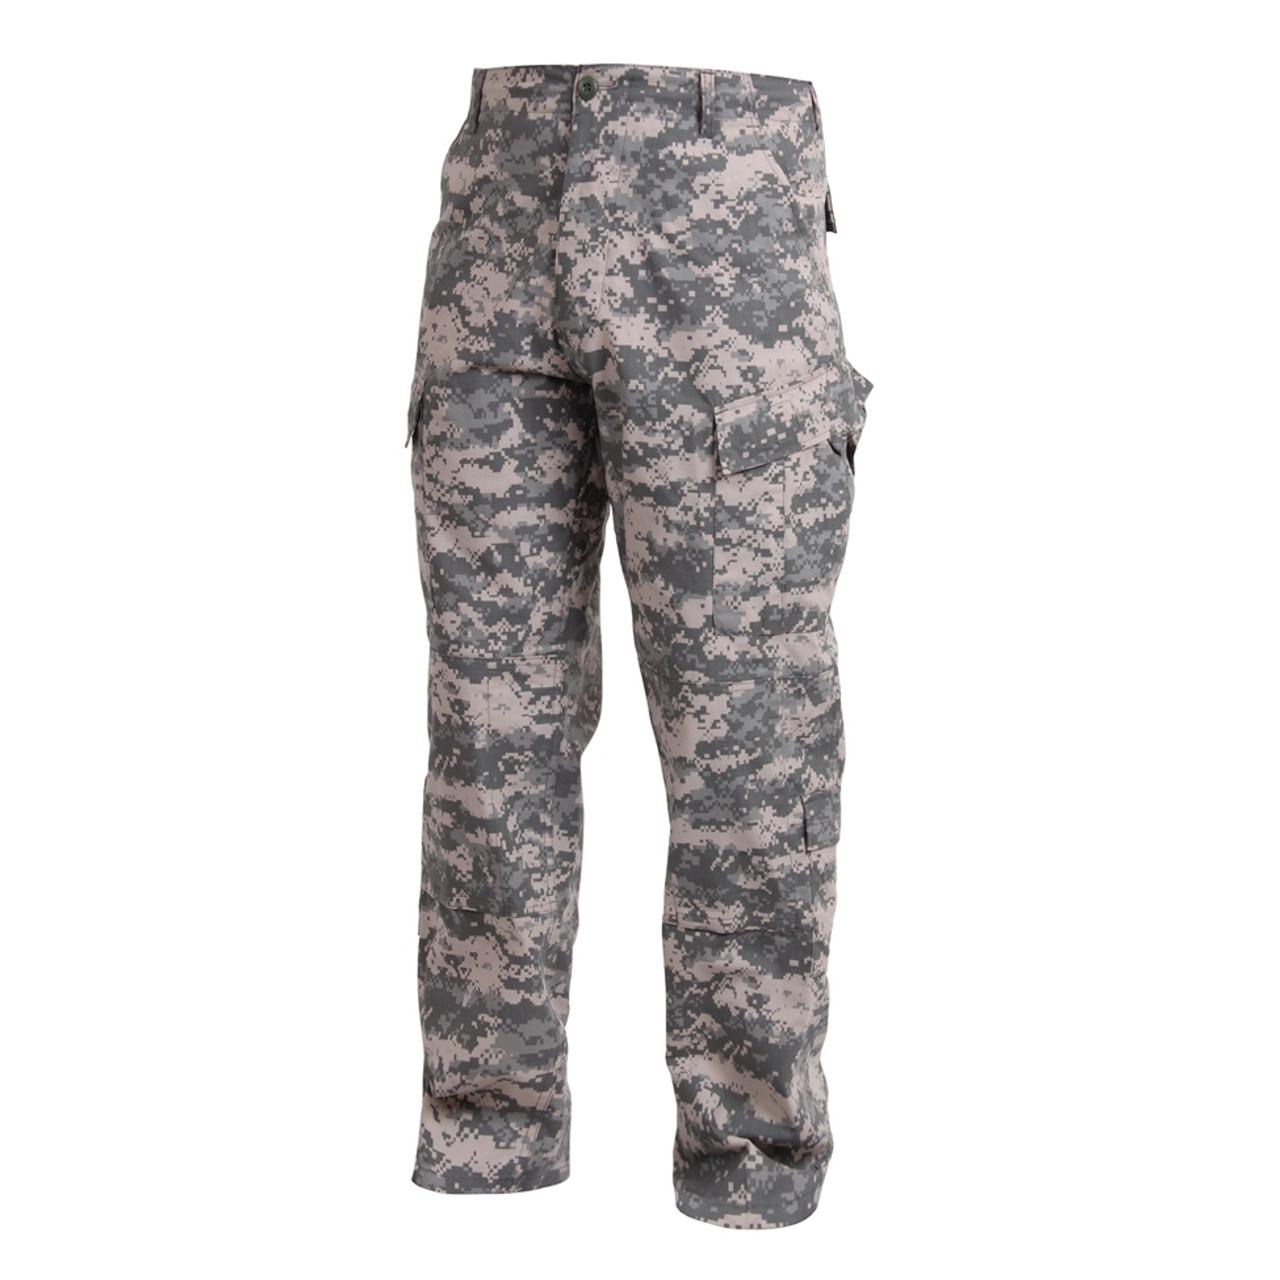 Amazon.com : IDOGEAR Men's G3 Combat Pants with Knee Pads Multi Camouflage  Trousers Airsoft Hunting Paintball Tactical Outdoor Pants (Black,30W x 31L)  : Sports & Outdoors